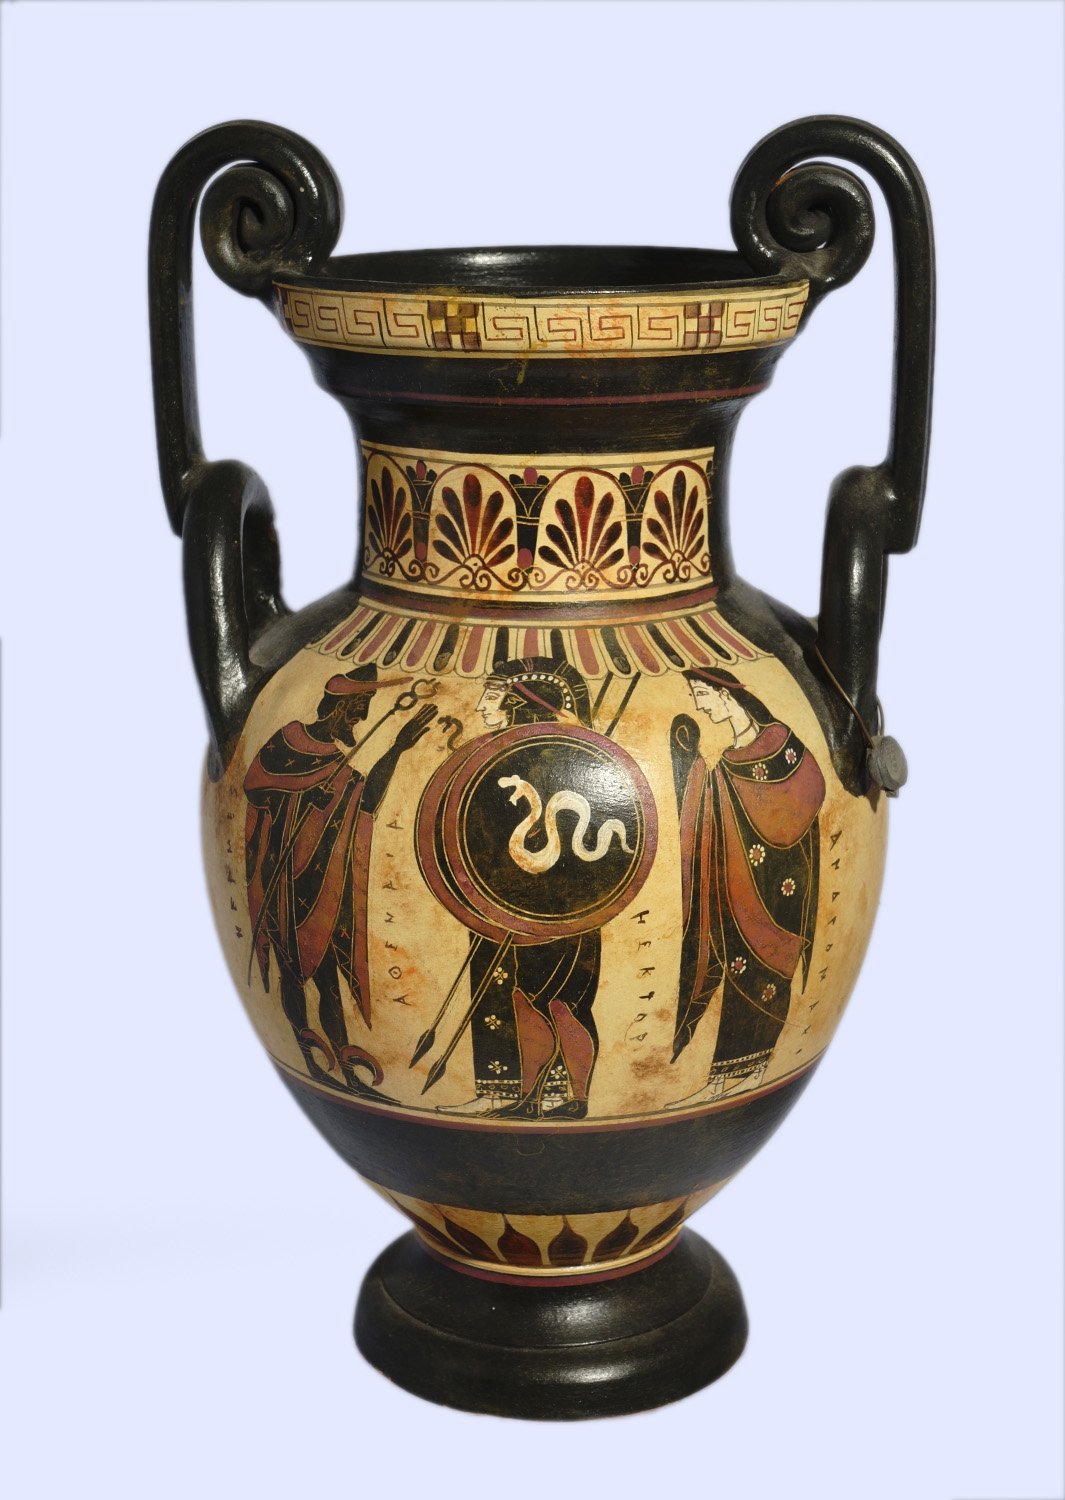 Archaic black-figure amphora with Hermes, Athena, Hector and Andromache